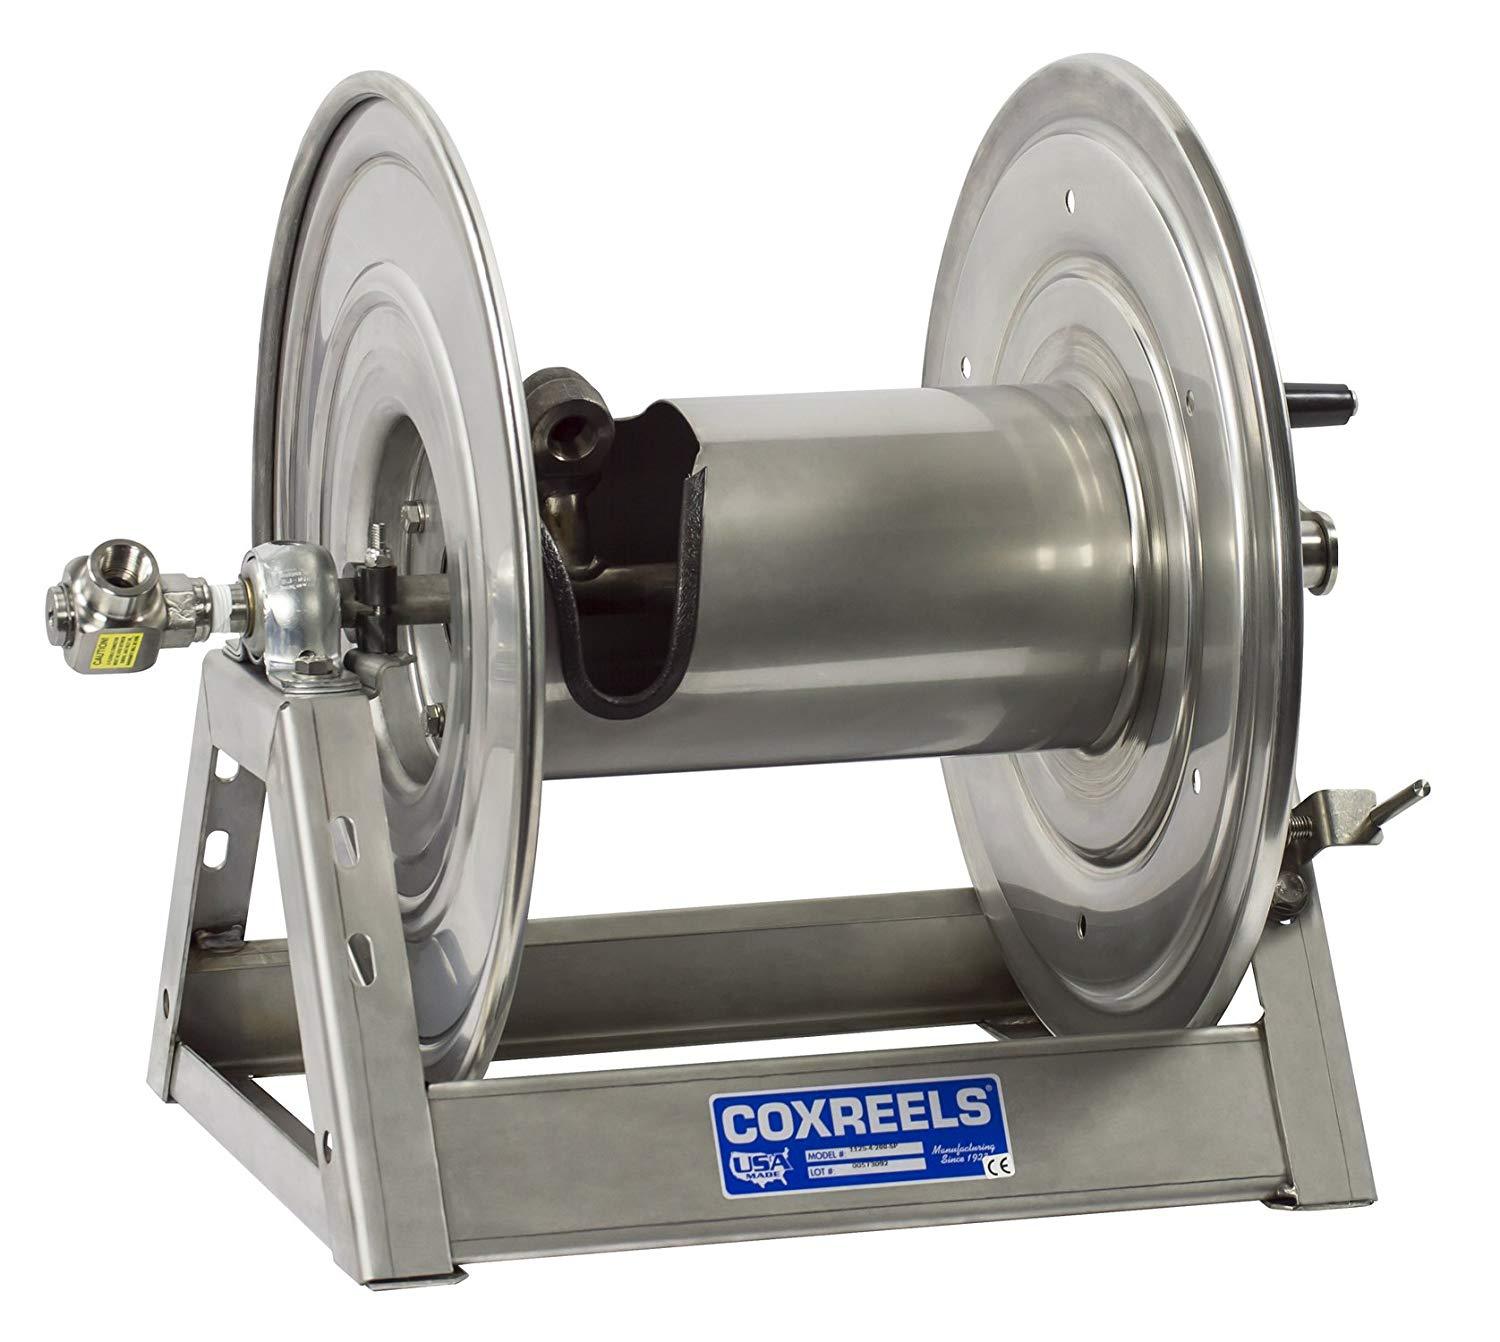 1125-5-200-SP : Coxreels 1125-5-200-SP Stainless Steel Hand Crank Hose Reel, 3/4" ID, 200' capacity, NO HOSE, 3000psi